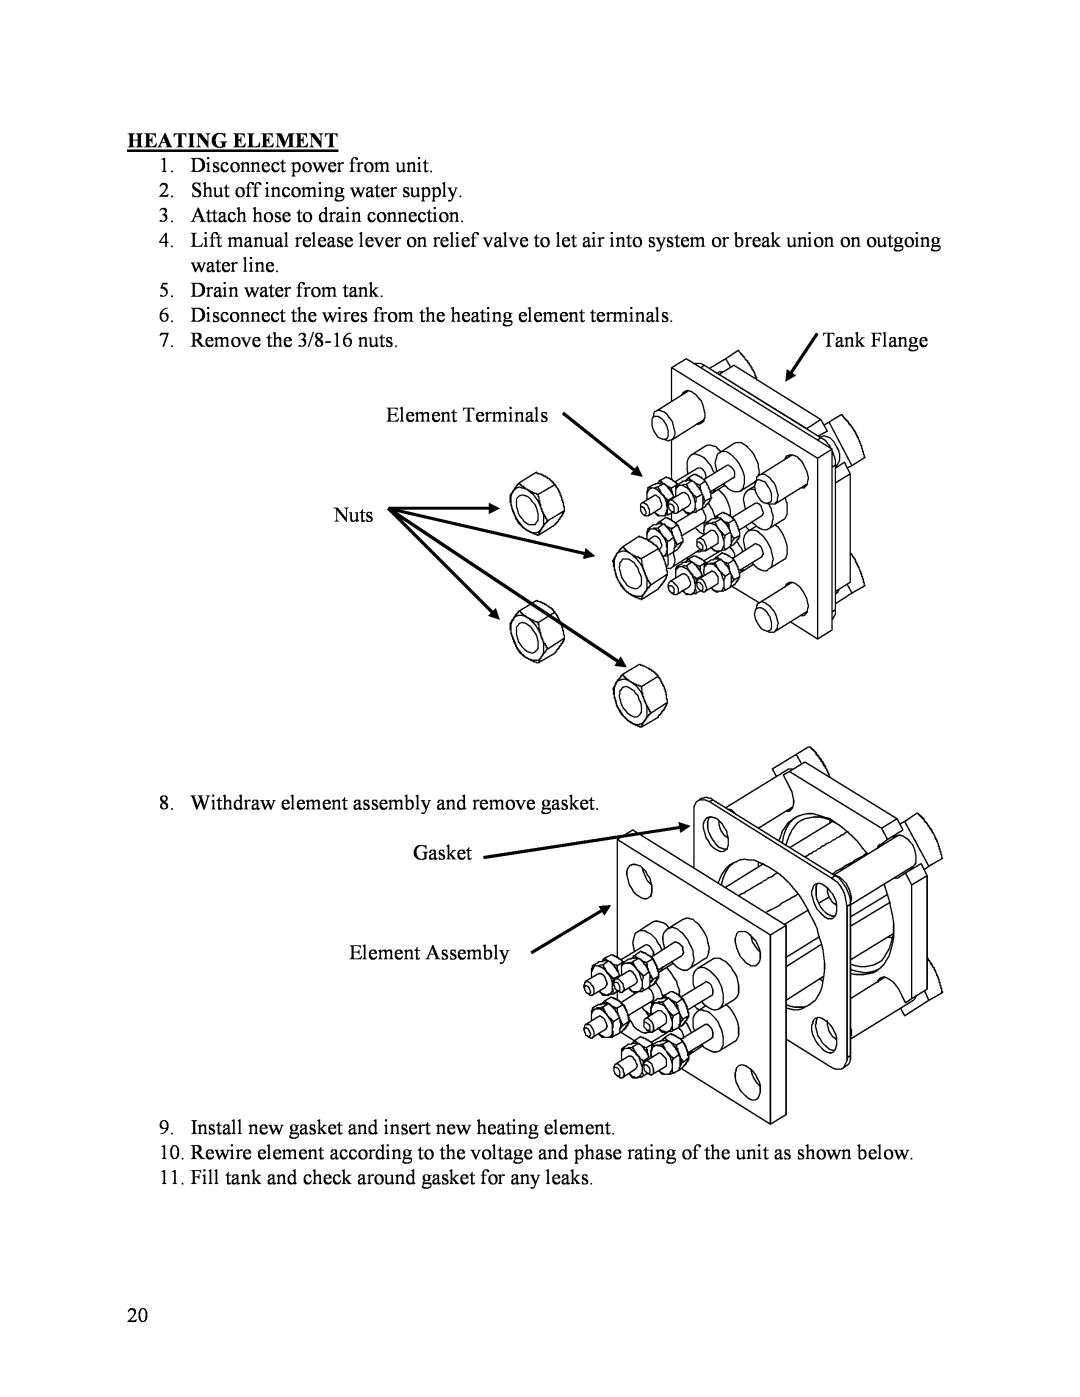 Hubbell Electric Heater Company MSE manual Heating Element, Disconnect power from unit 